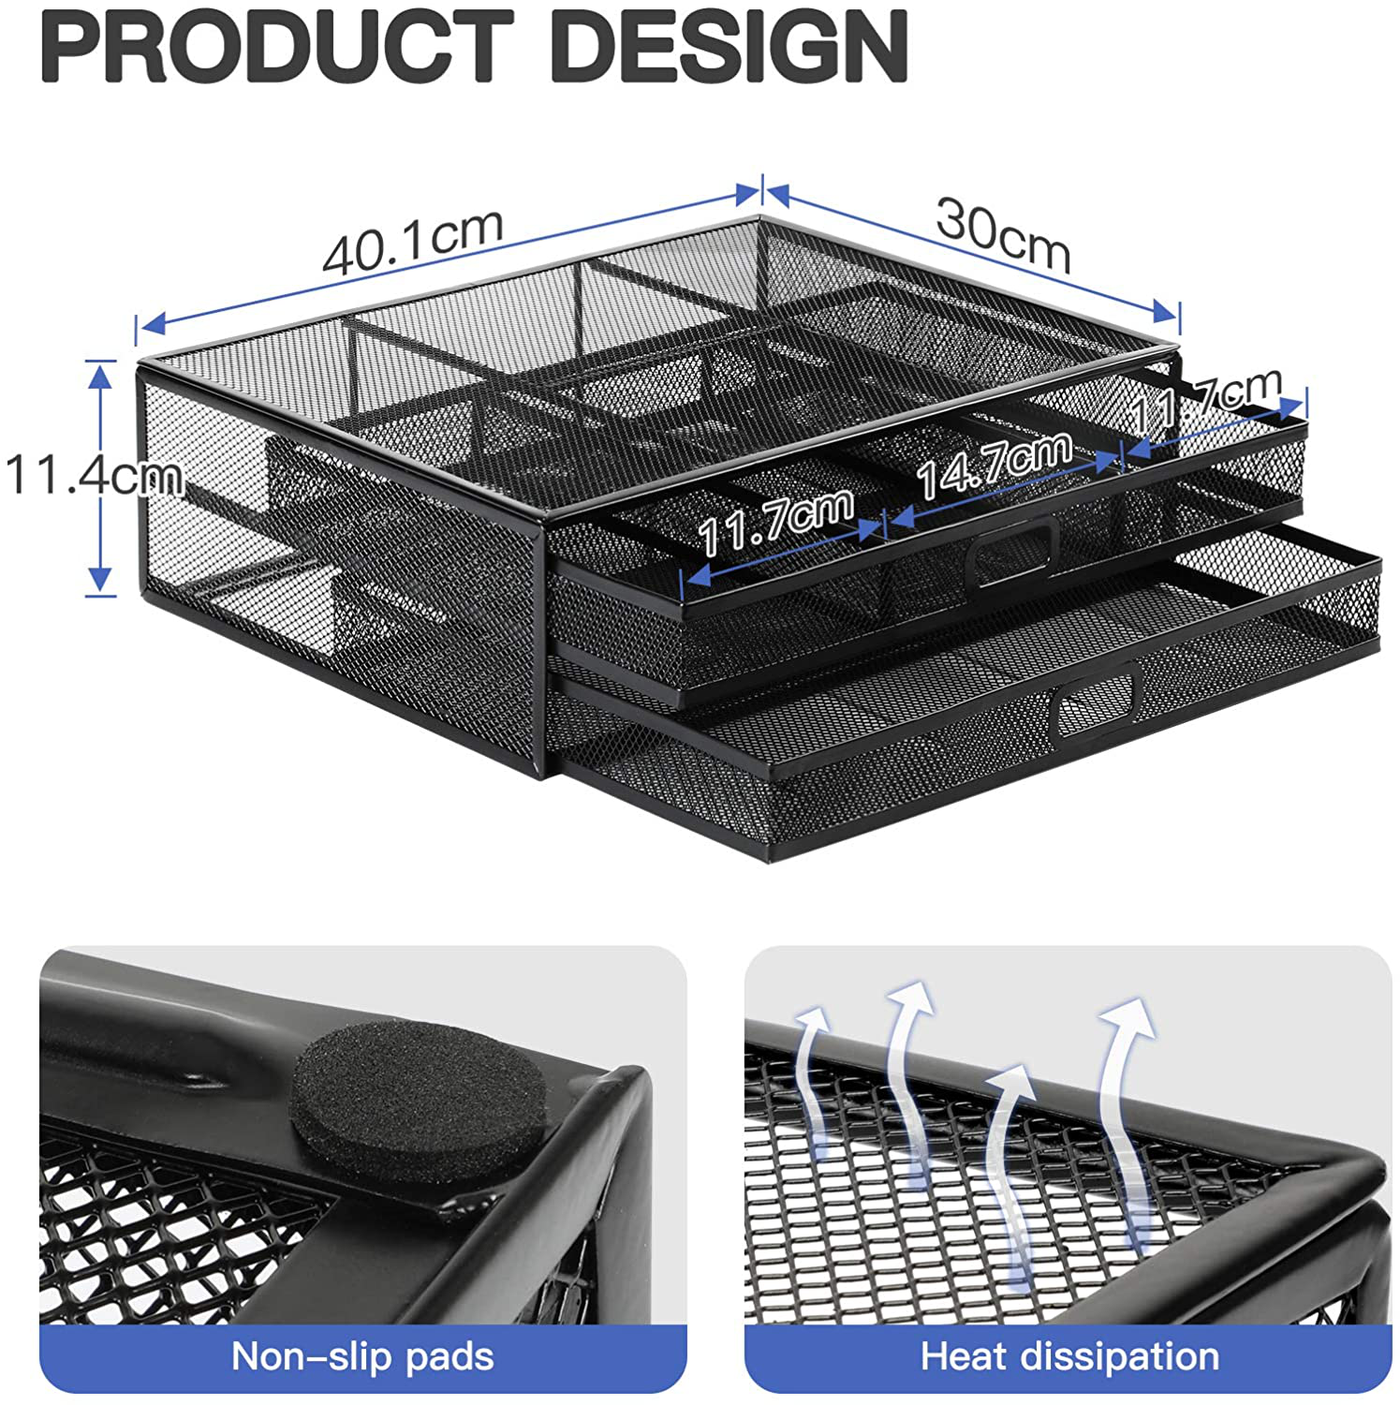 Monitor Stand Riser with Drawer - Mesh Metal Desk Organizer PC, Laptop, Notebook, Printer Holder with Pull Out Storage Drawer by HUANUO